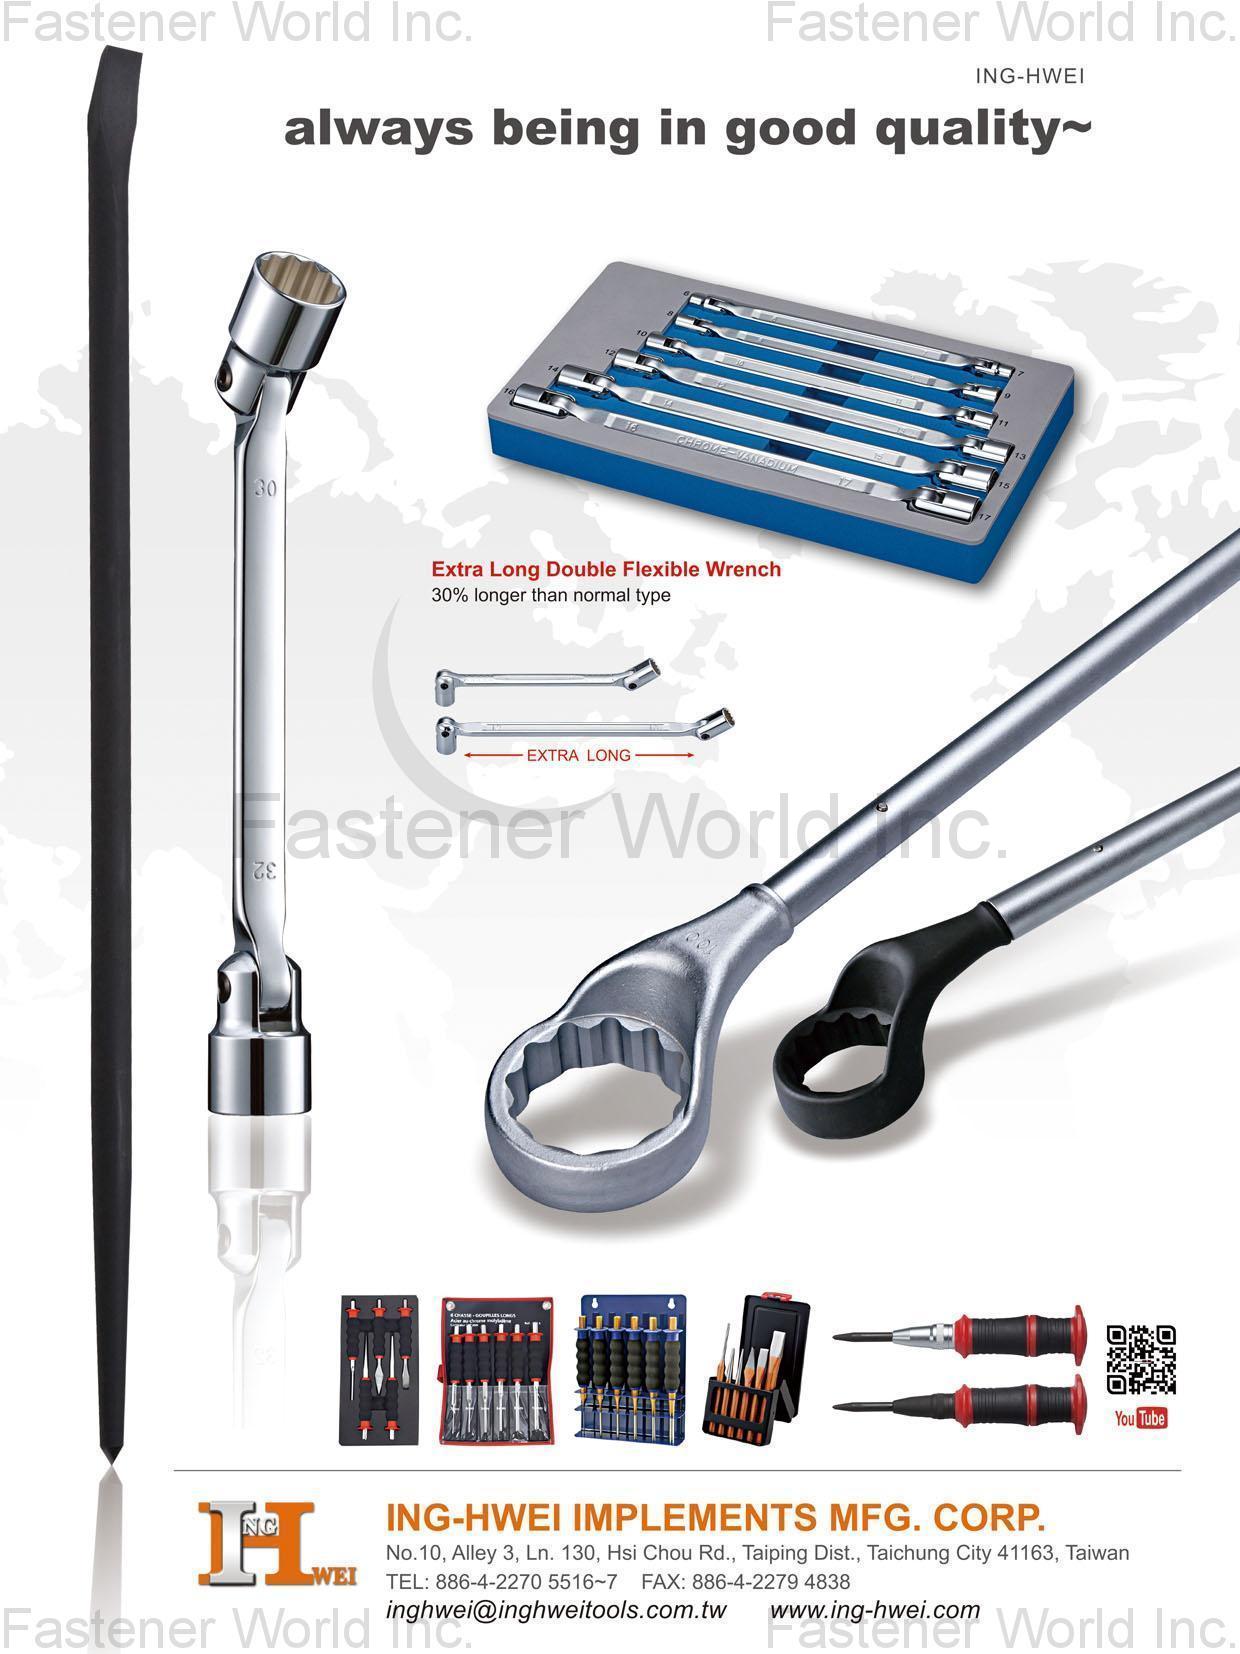 ING-HWEI IMPLEMENTS MFG. CORP. , SOCKETS & WRENCHS, PUNCH & CHISEL, TOOL SETS